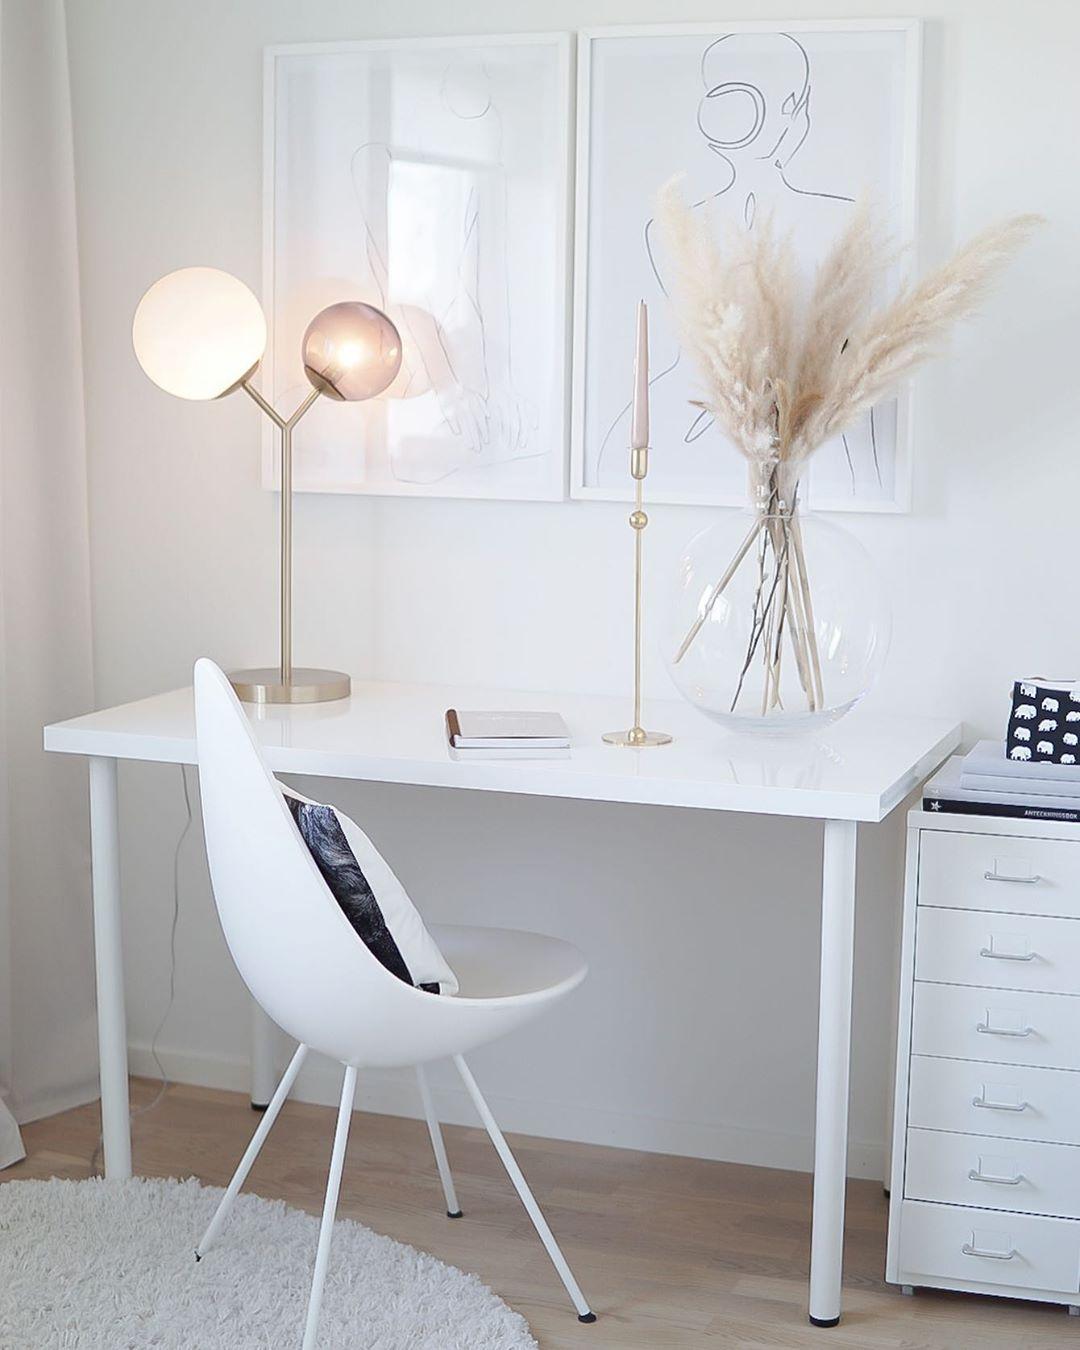 Work From Home: 3 Easy Home Office Ideas to Instantly Spark Productivity